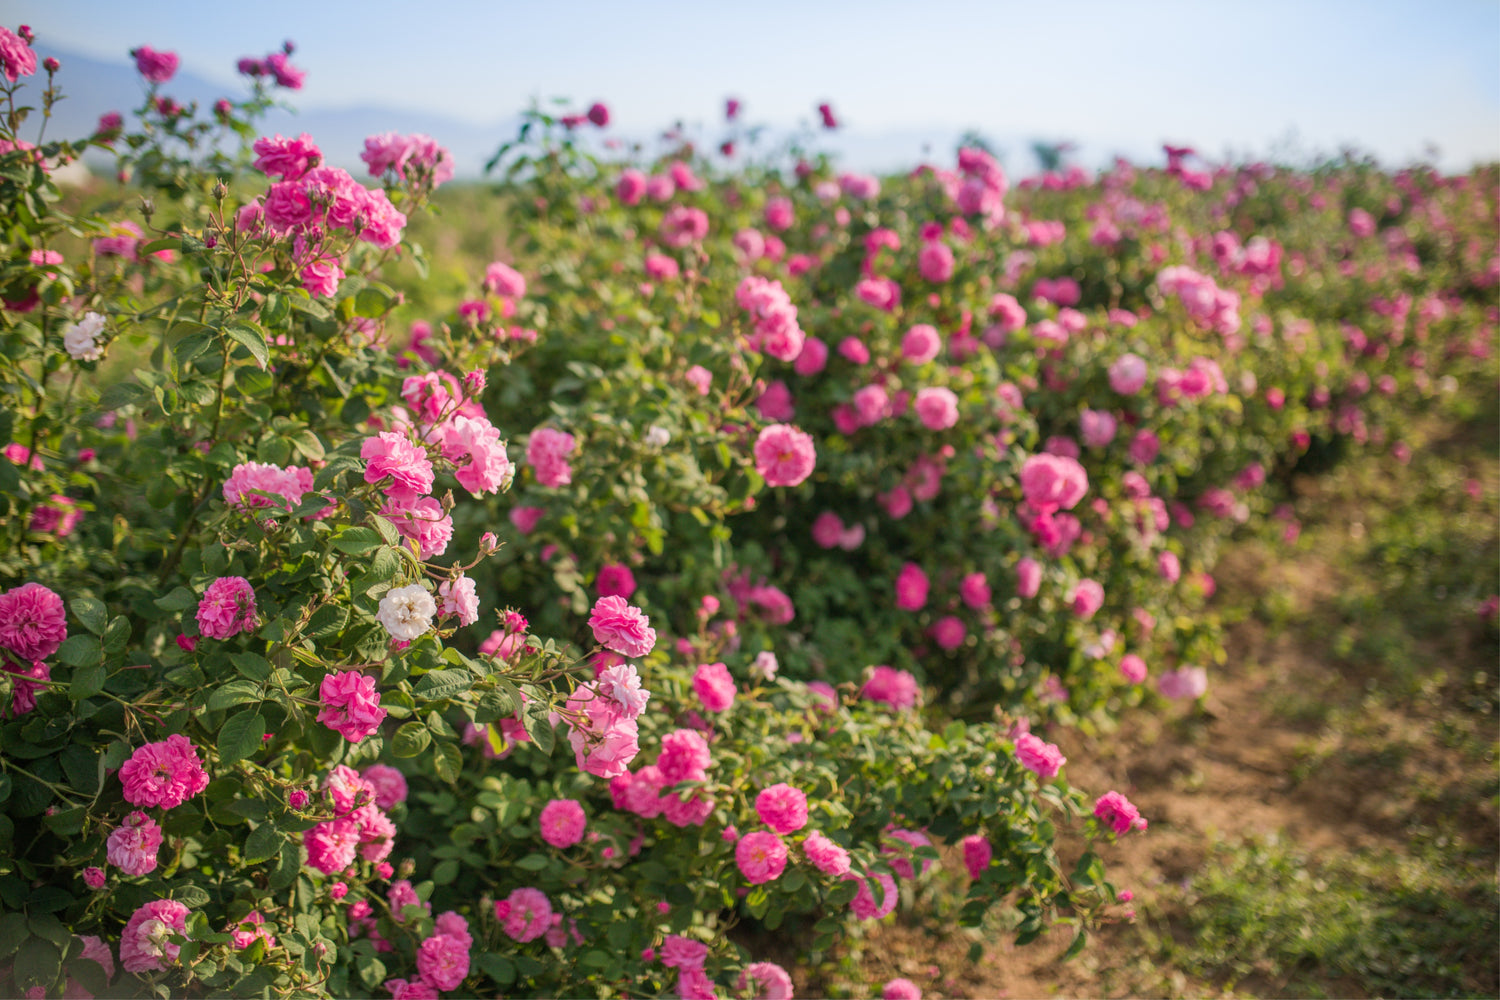 A field of rosa damascena roses on a sunny day.